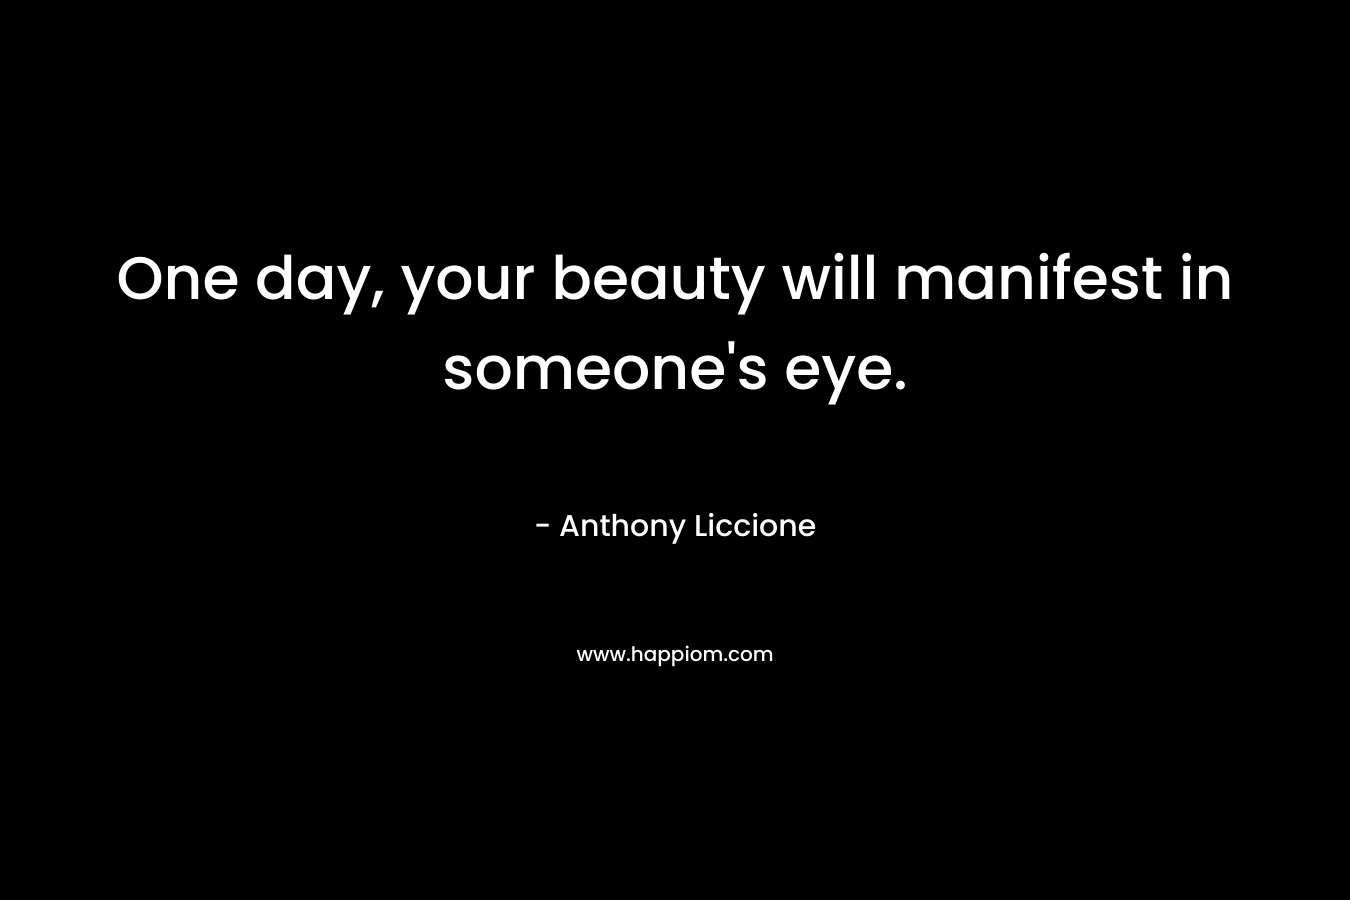 One day, your beauty will manifest in someone's eye.